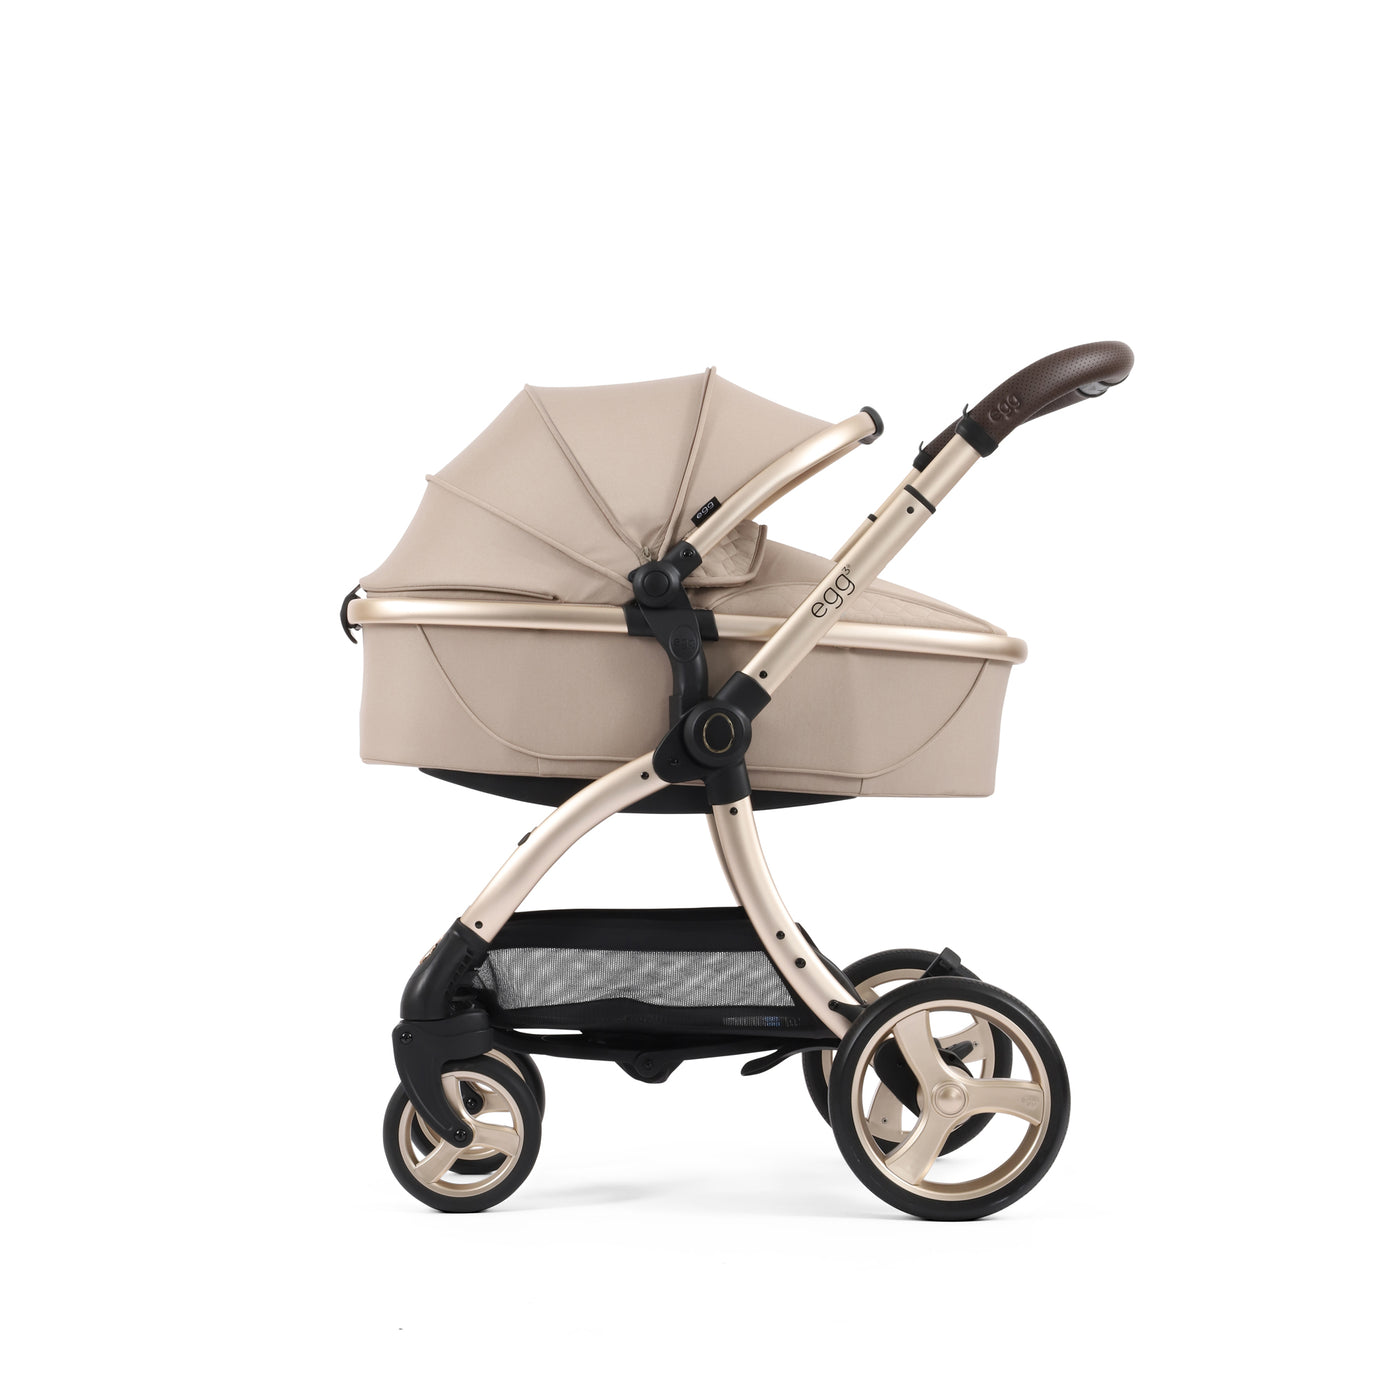 egg3 Carrycot  - Feather